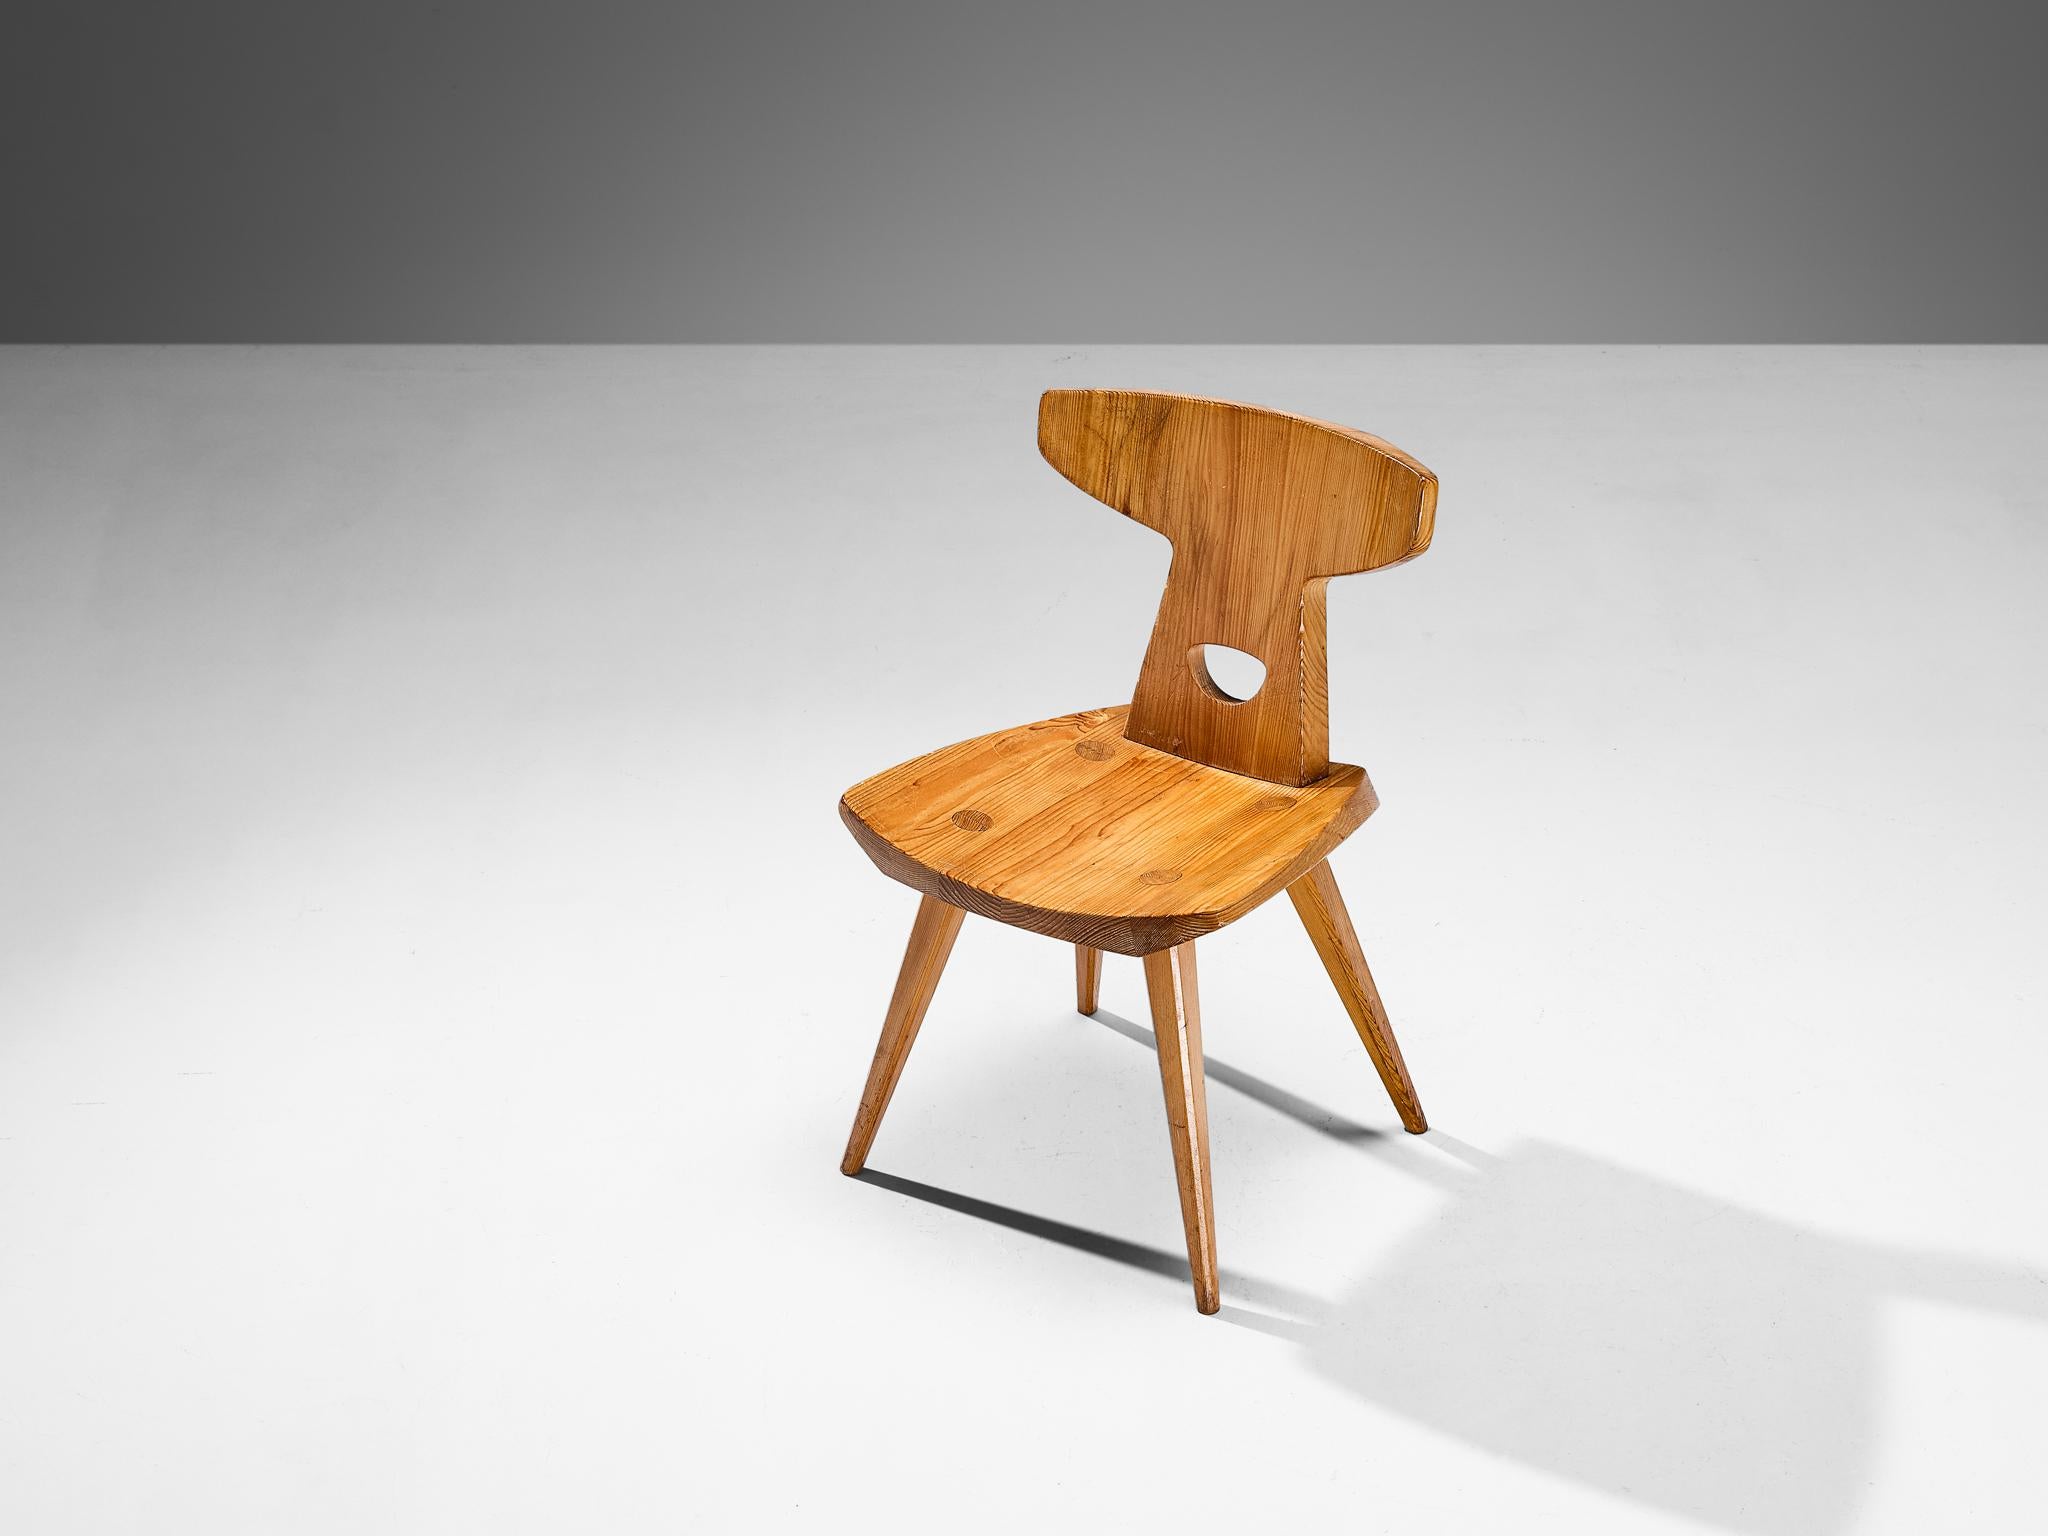 Jacob Kielland-Brandt, dining chair, solid pine, Denmark, 1960s

This remarkable chair is designed by Danish designer Jacob Kielland-Brandt in the 1960s. It has a strong expression, due to the sleek design and beautiful detailing. For instance the